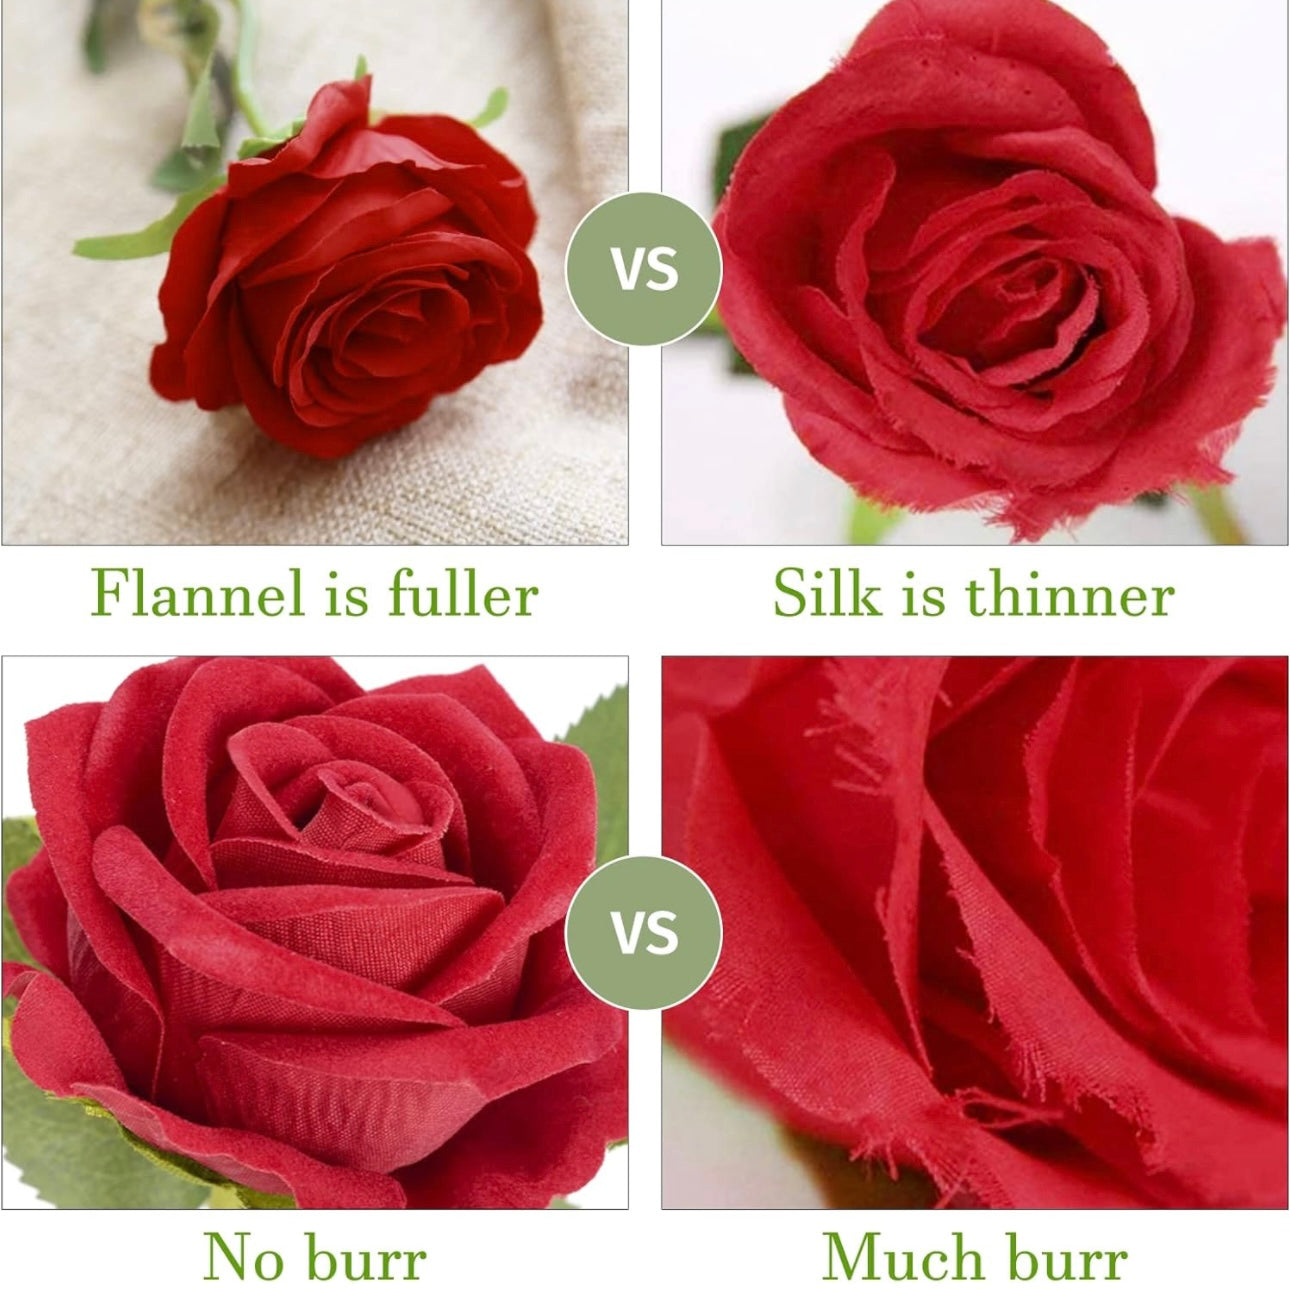 Artificial Red Roses Valentines Day High Quality